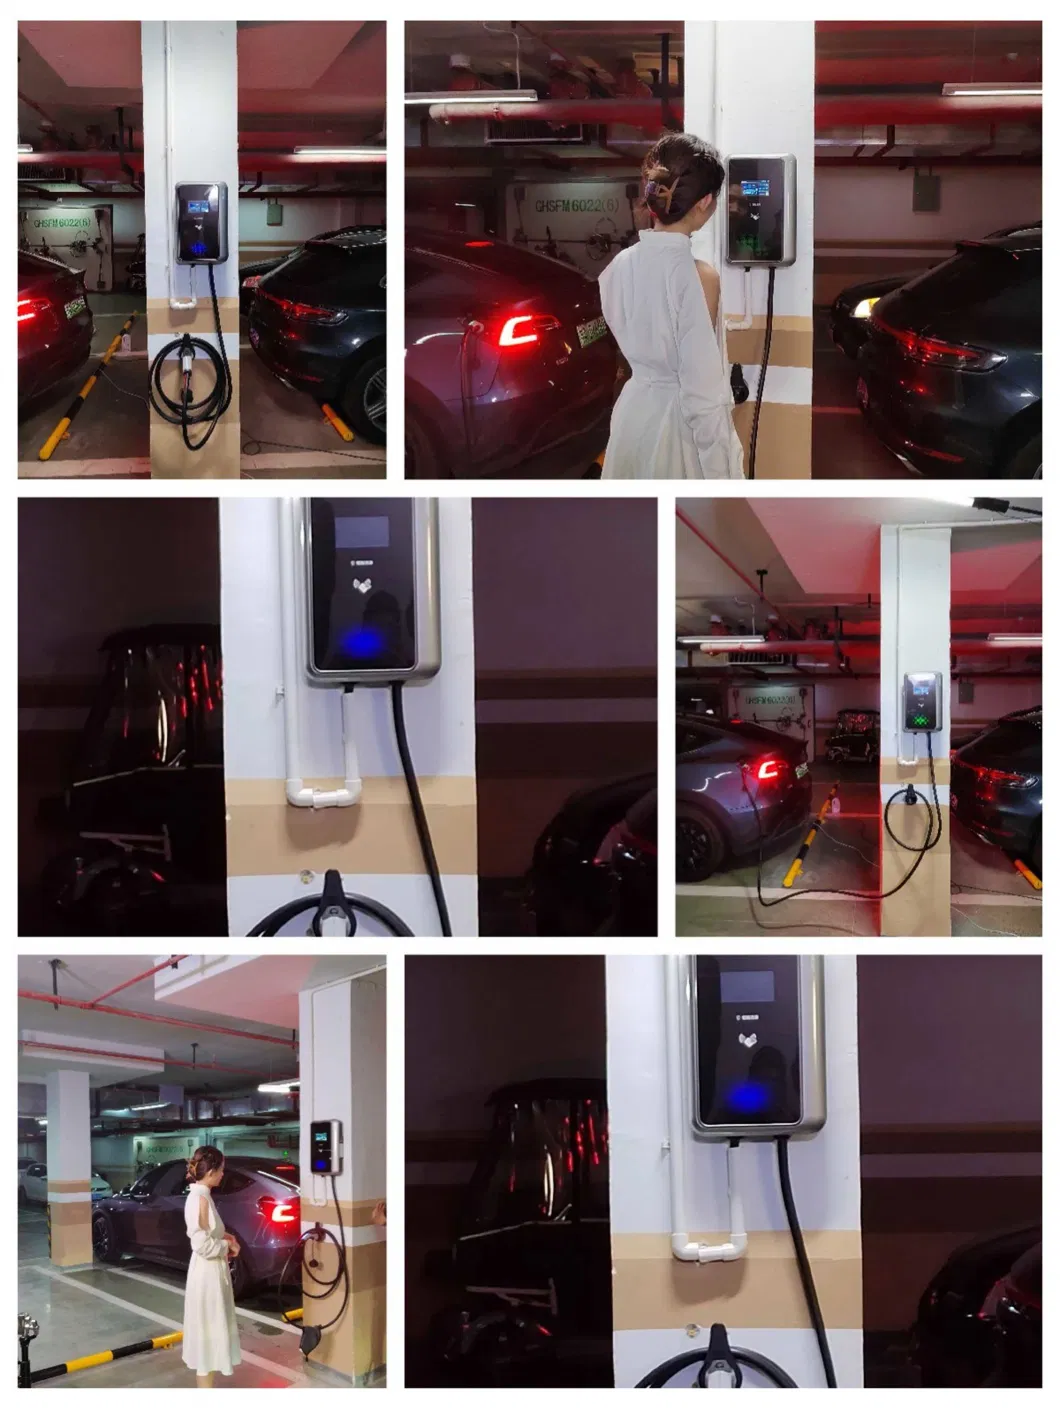 220V 11kw 8 to 48A Fast Charging Wall Box Mode 3 Portable Electric Car Charging Station EV Charger with LCD Screen